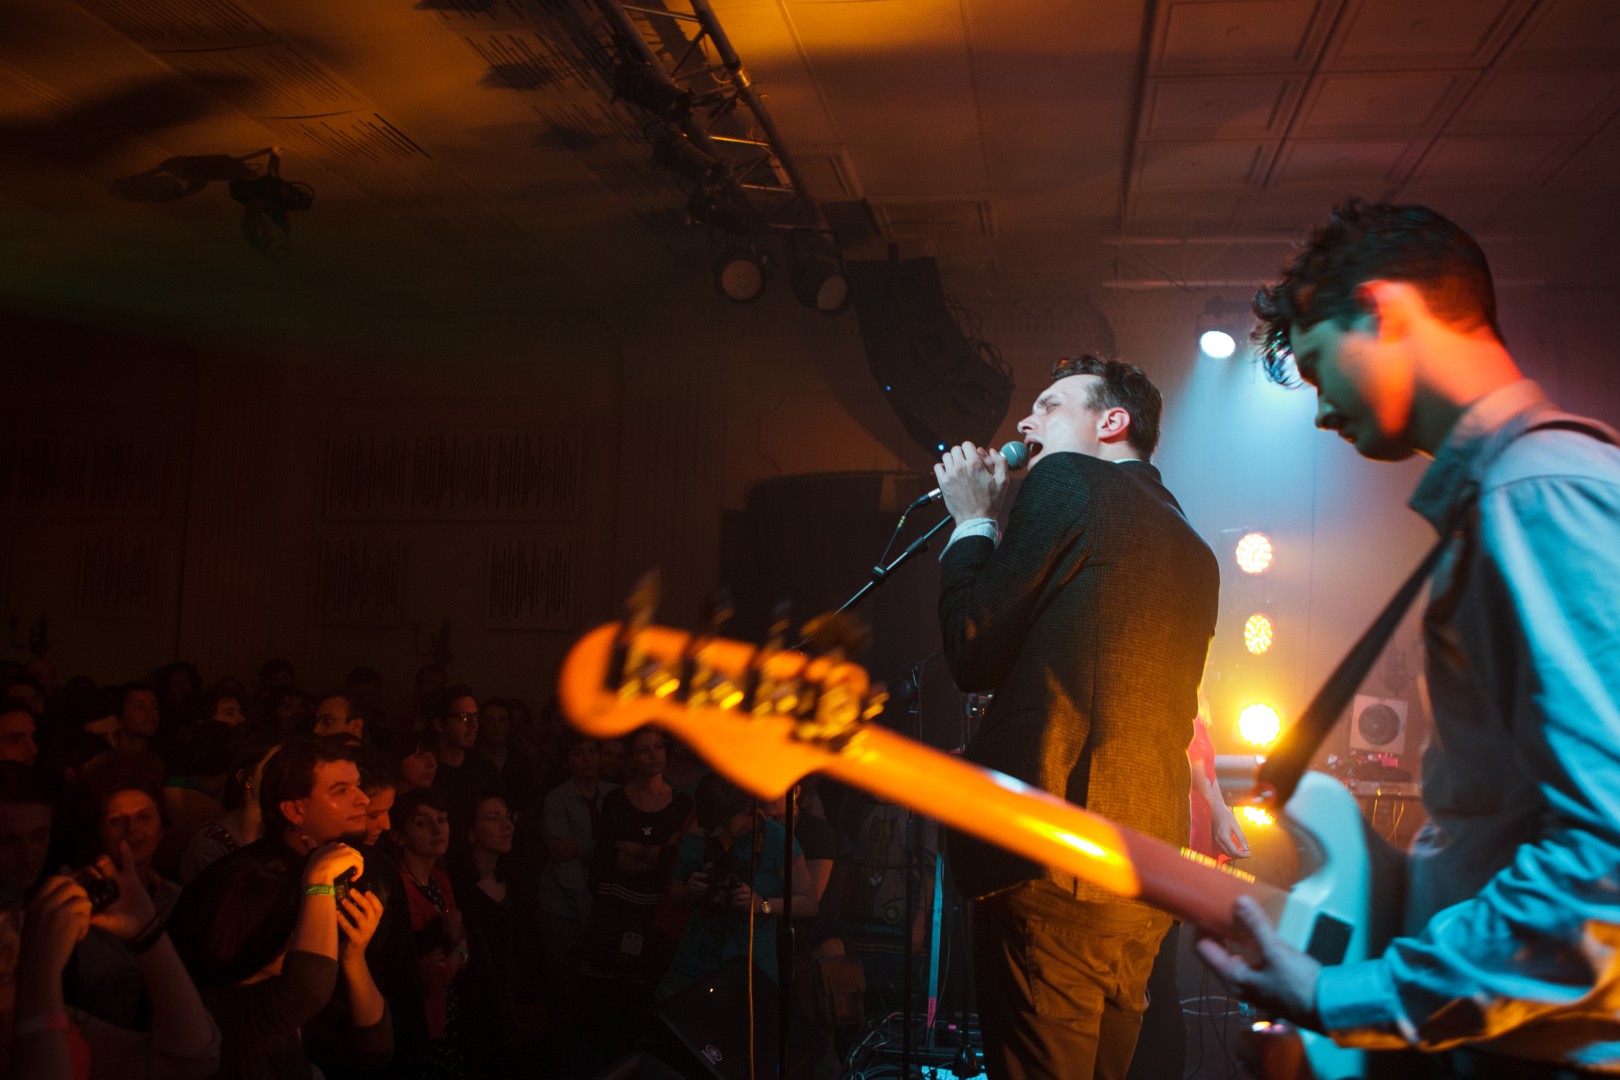 Efterklang at Control Club in Bucharest on November 14, 2013 (4492cc7454)